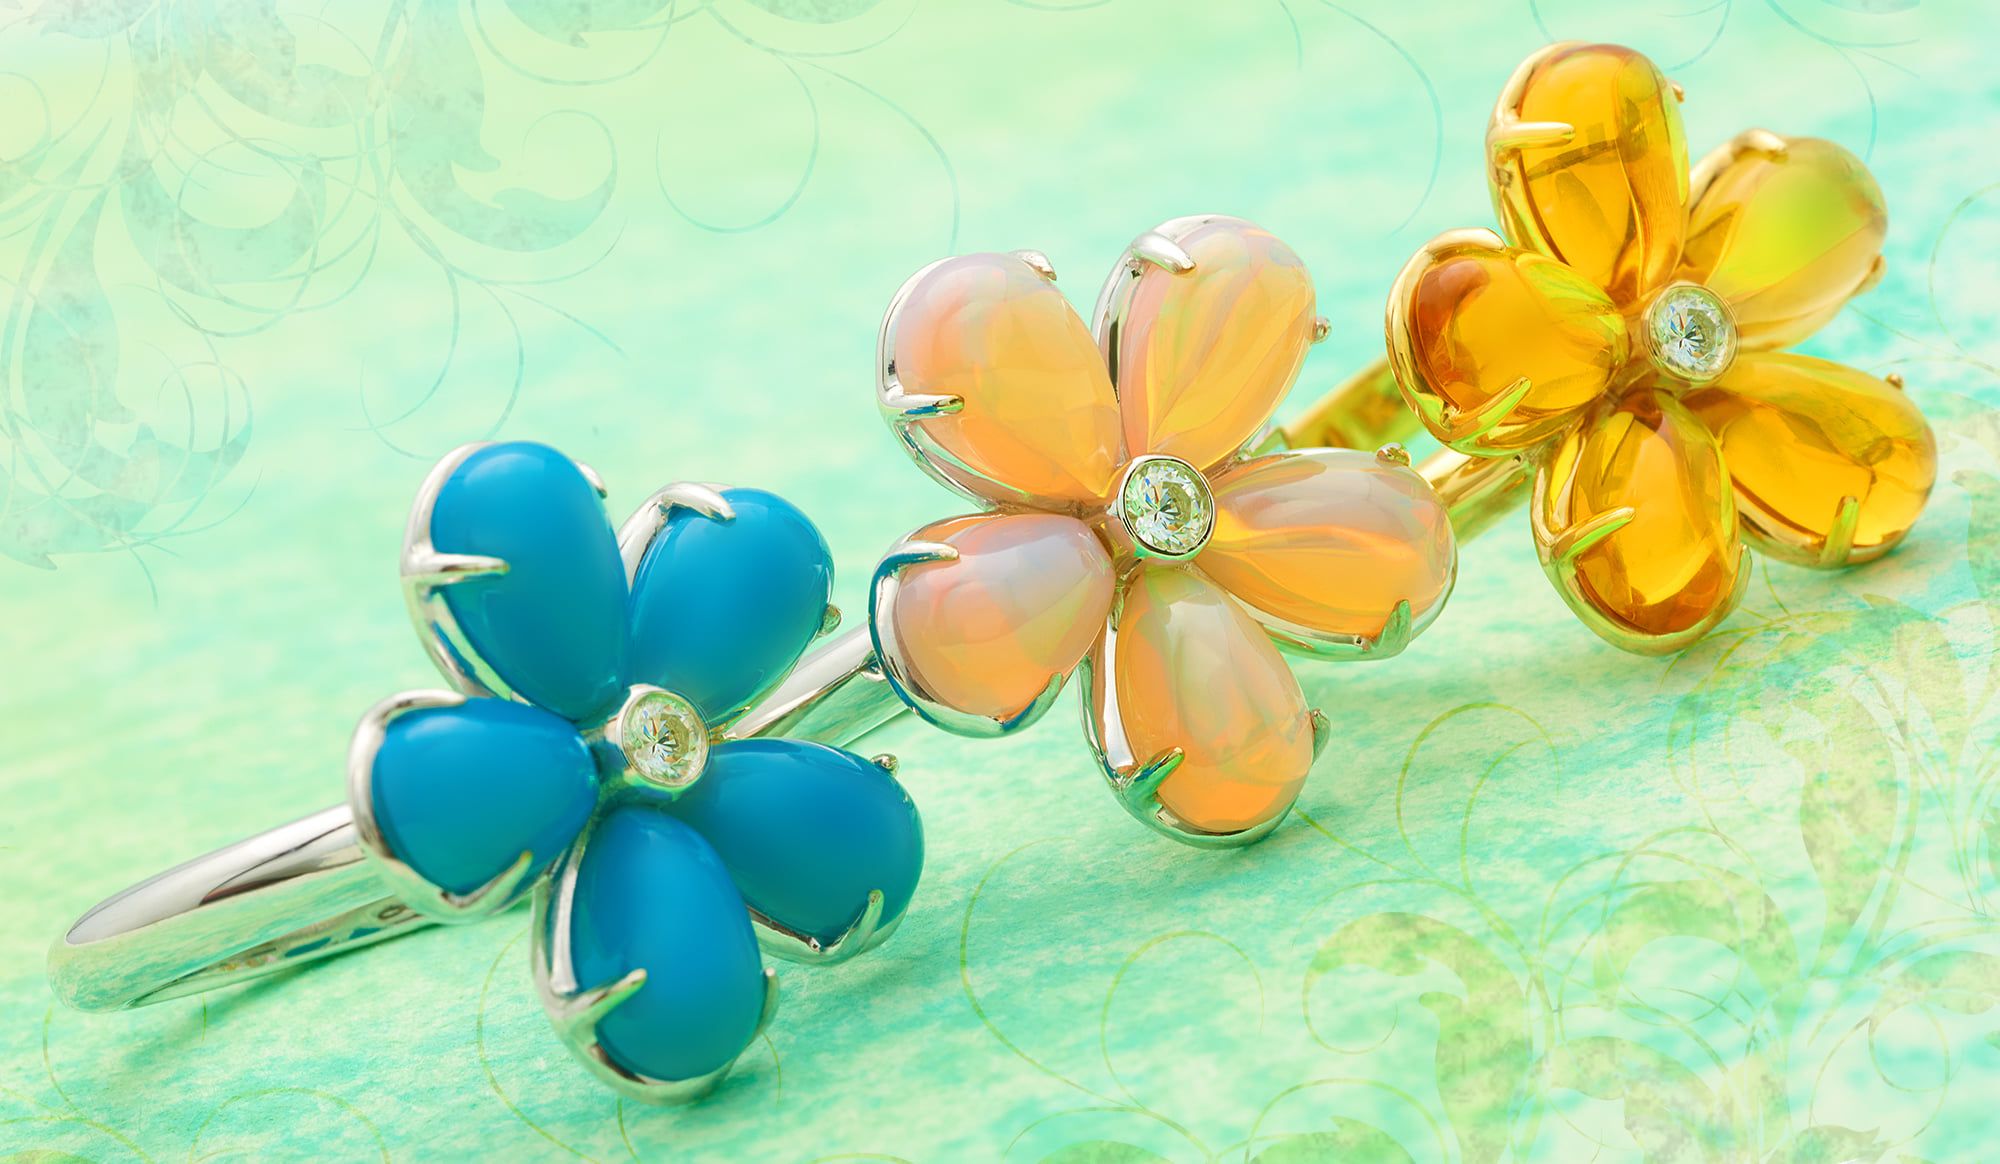 Treat yourself to an everyday bouquet with these exquisite blooming flower rings.